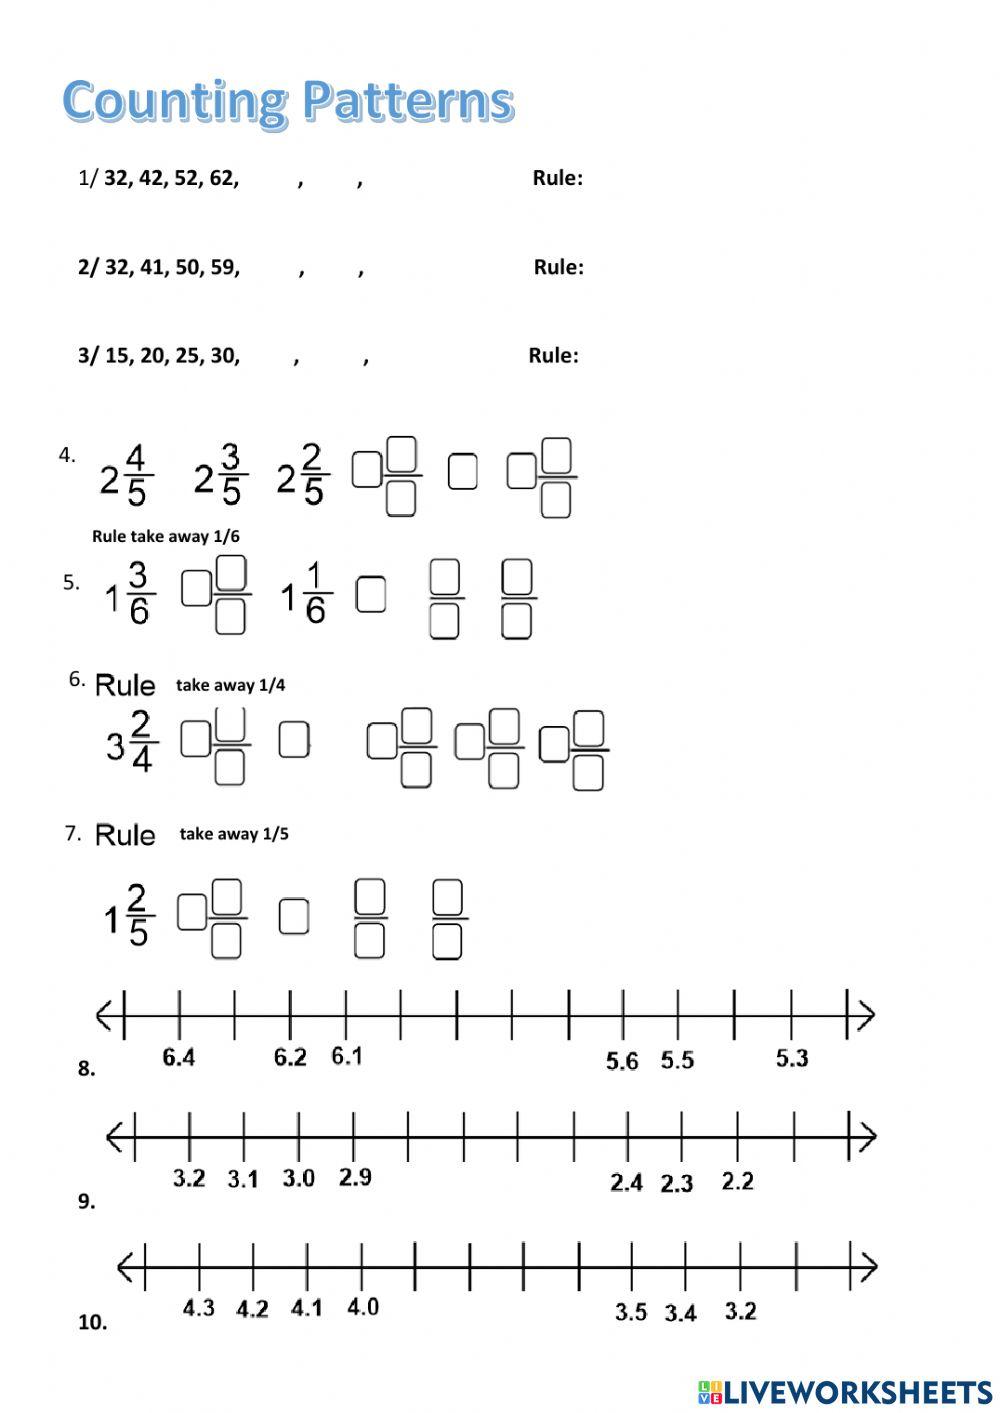 CHILL 5 Counting Patterns Mixed Fractions and Decimals